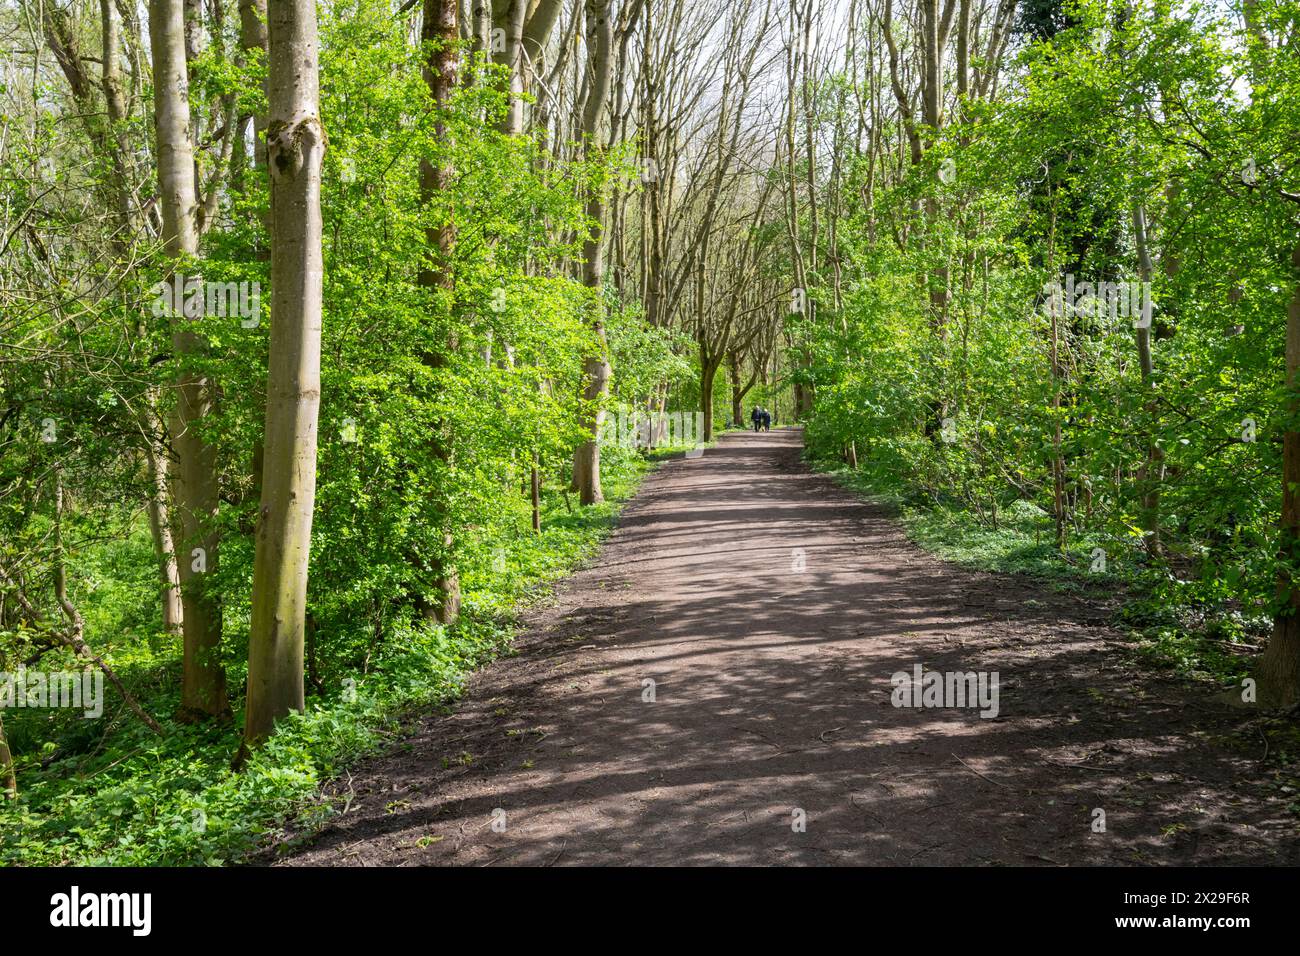 Path through woodland near Fletcher Moss botanical garden at Didsbury in South Manchester on a sunny spring day. Stock Photo